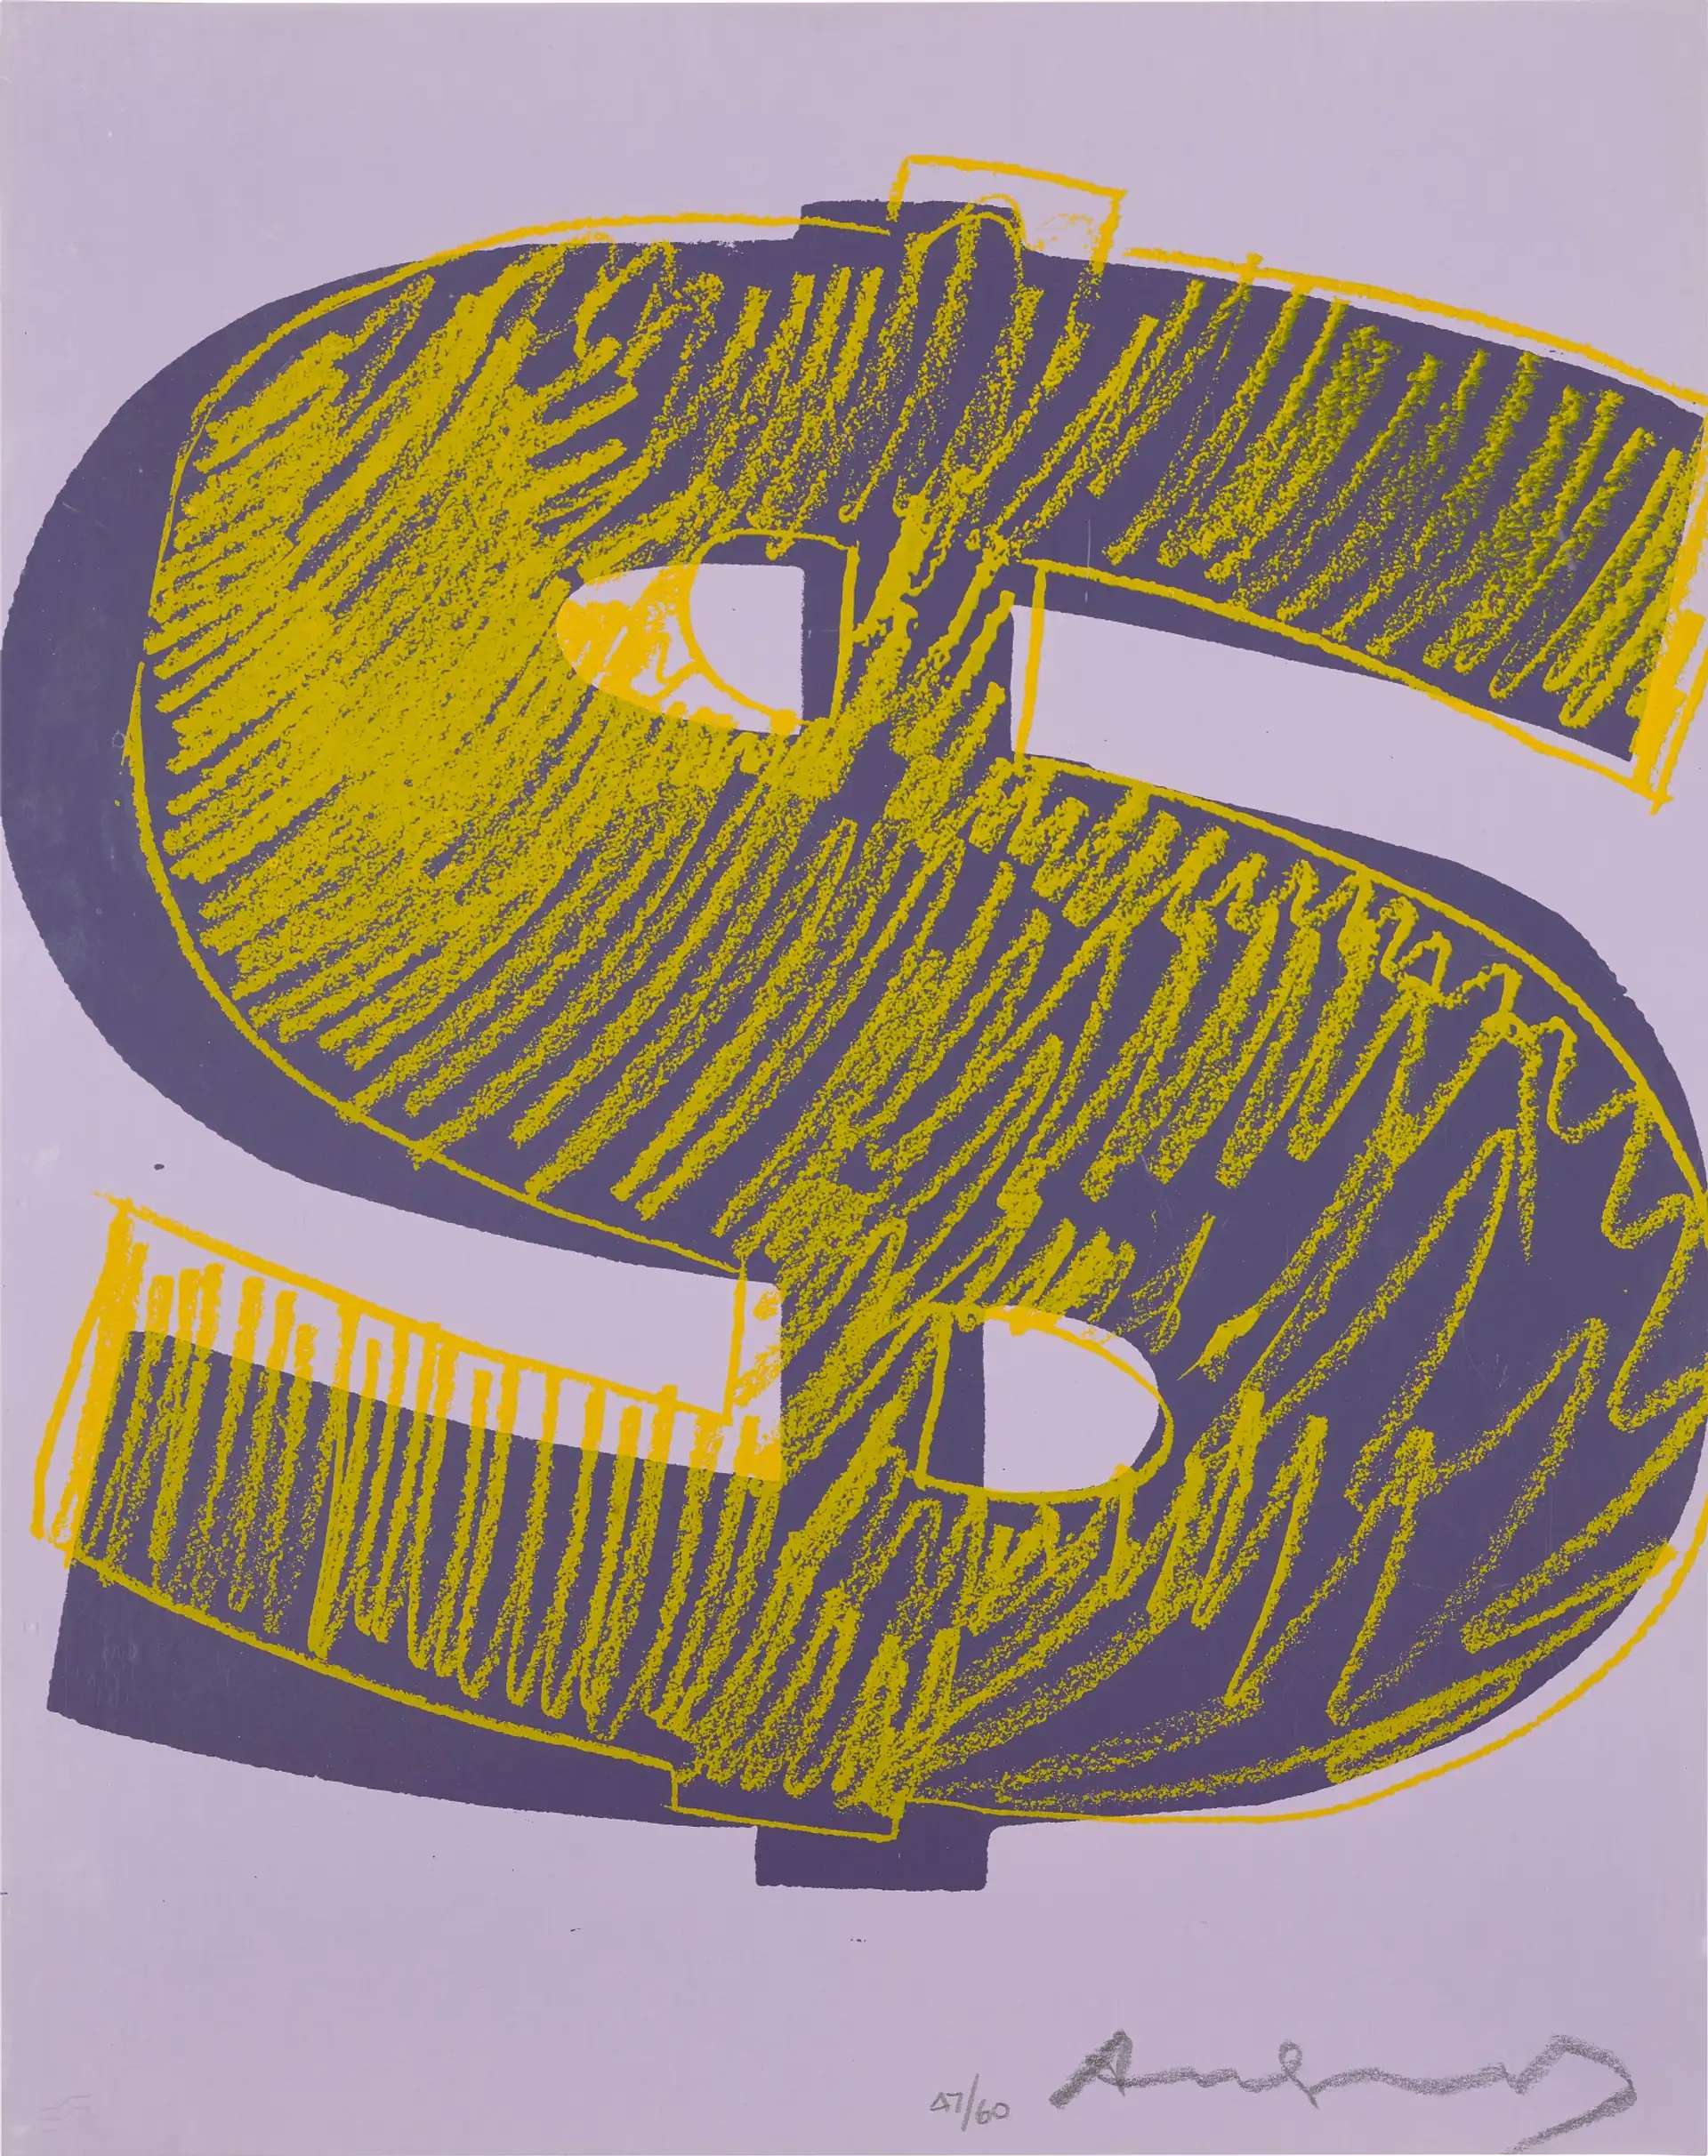 A screen printed dollar sign in dark purple overlayed with yellow against a lilac background.